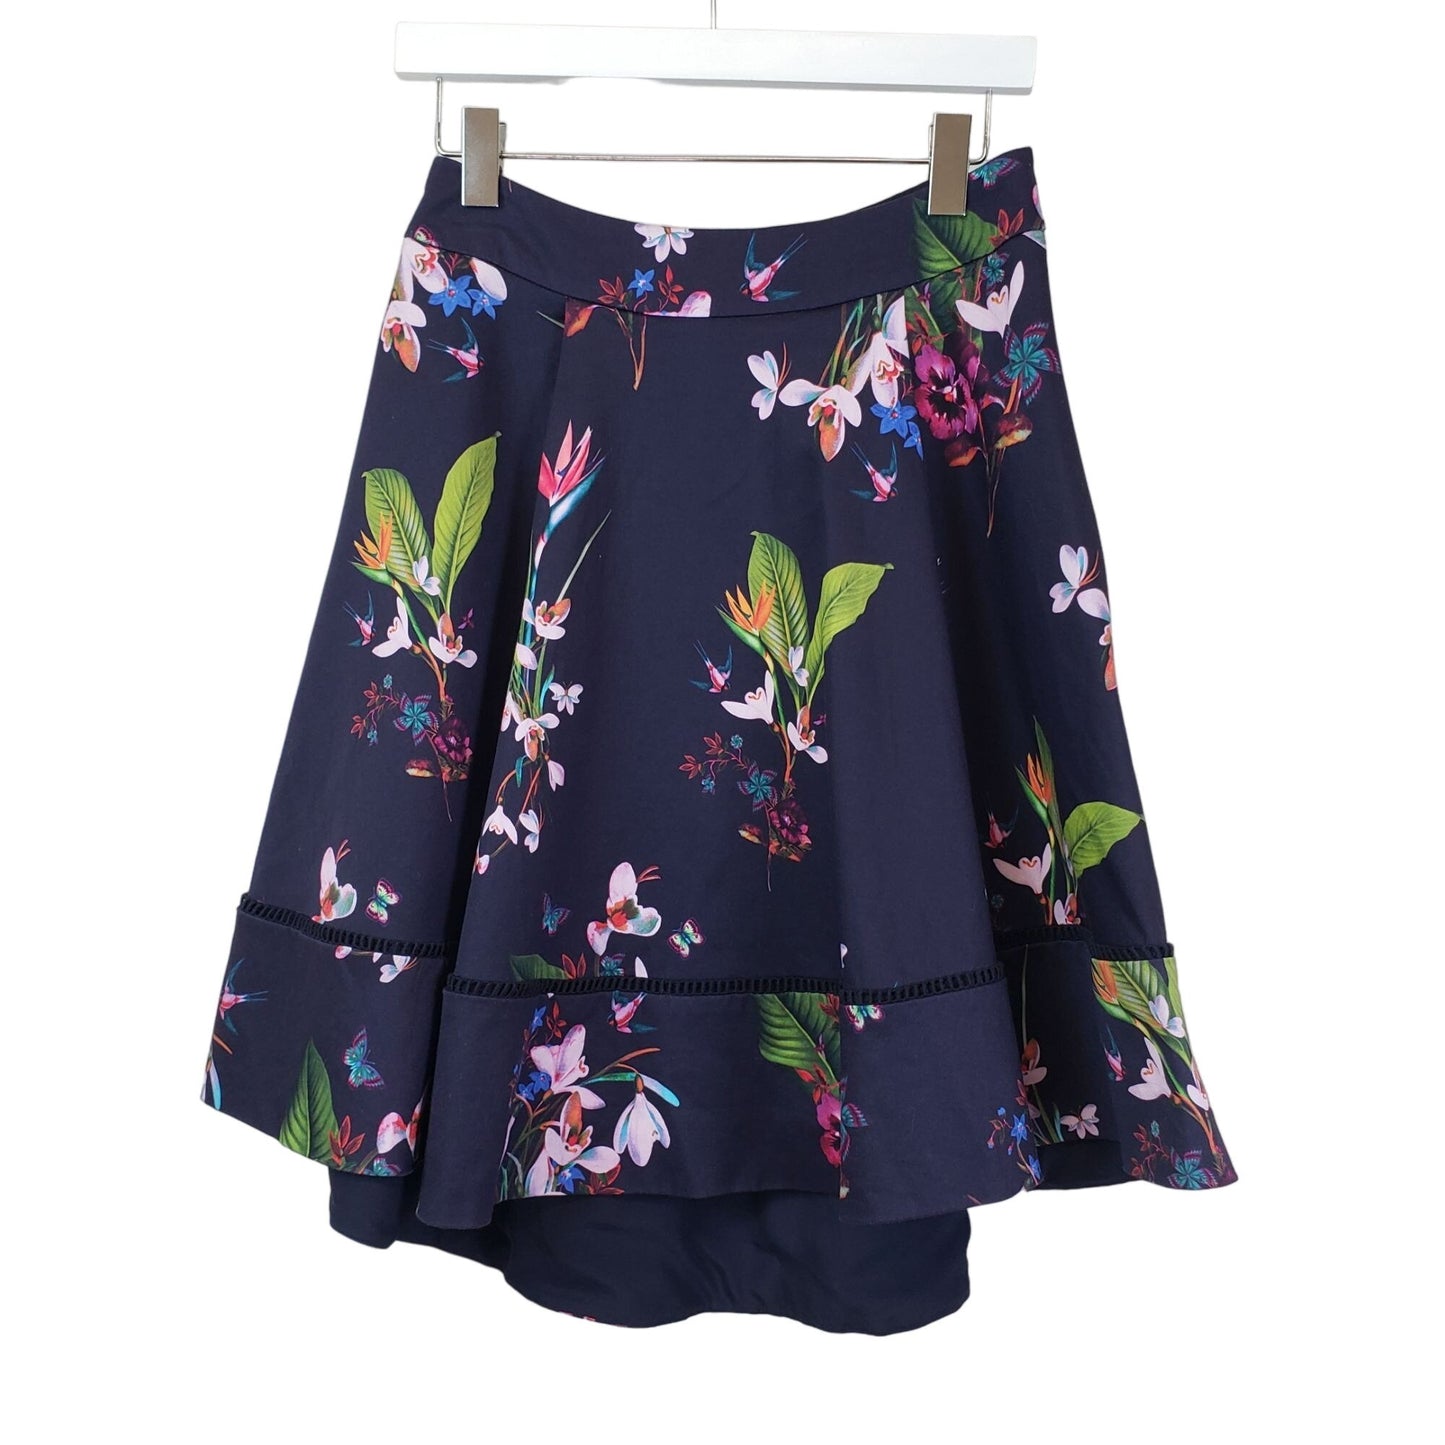 Ted Baker Plio Skirt in Tropical Oasis Floral Print Size TB 2/US 6